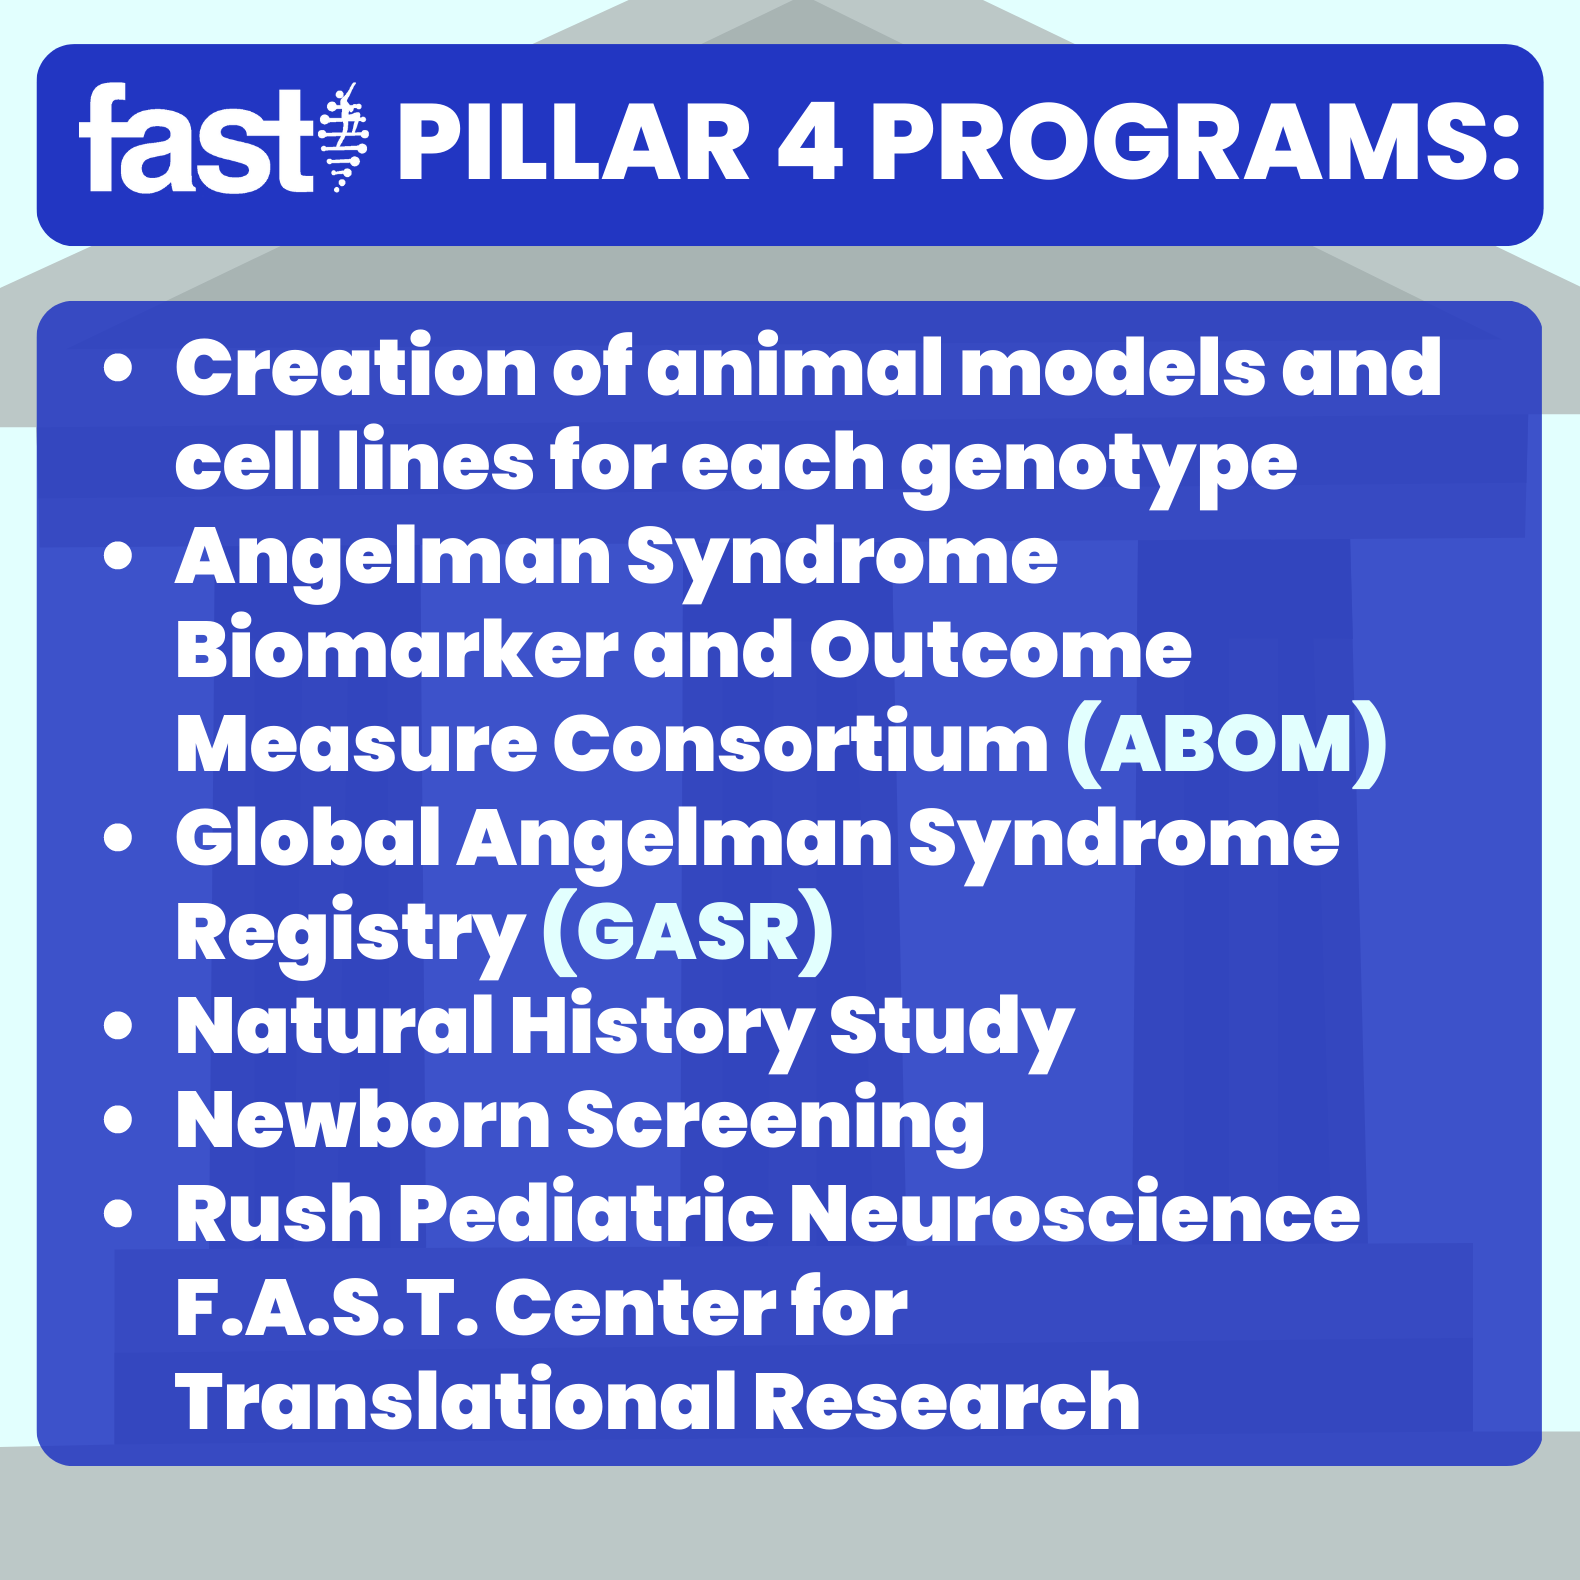 Pillar 4 programs: Creation of animal models and cell lines for each genotype, Angelman Syndrome Biomarker and Outcome Measure Consortium (ABOM), Global Angelman Syndrome Registry (GASR), Natural History Study, Newborn Screening, Rush Pediatric Neuroscience F.A.S.T Center for Translational Research